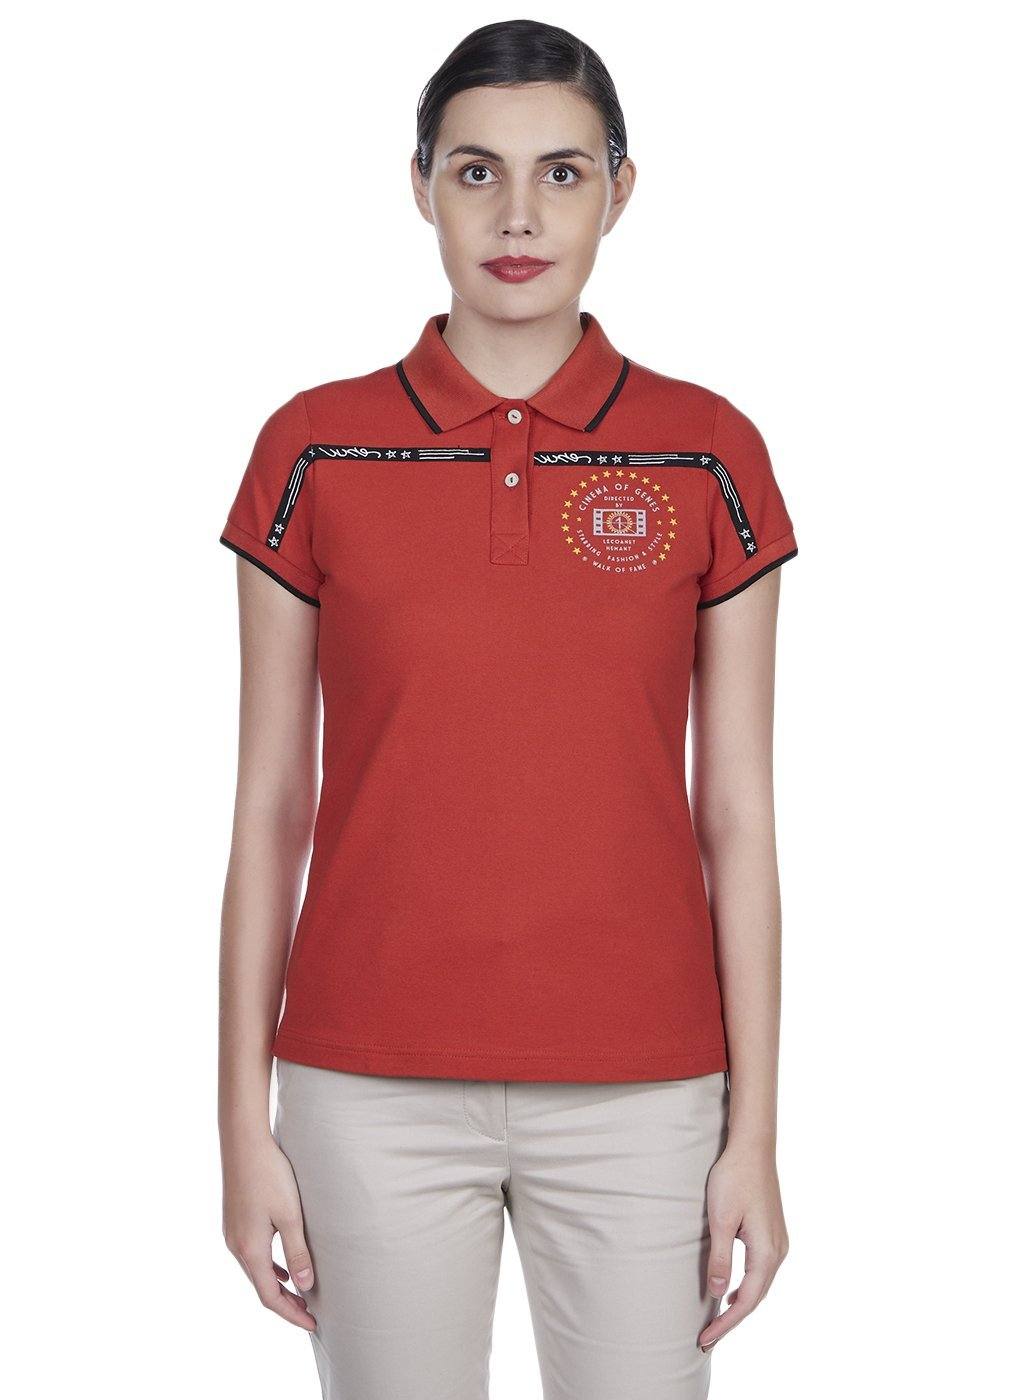 THE PEFECT AUDITION POLO - Genes online store 2020